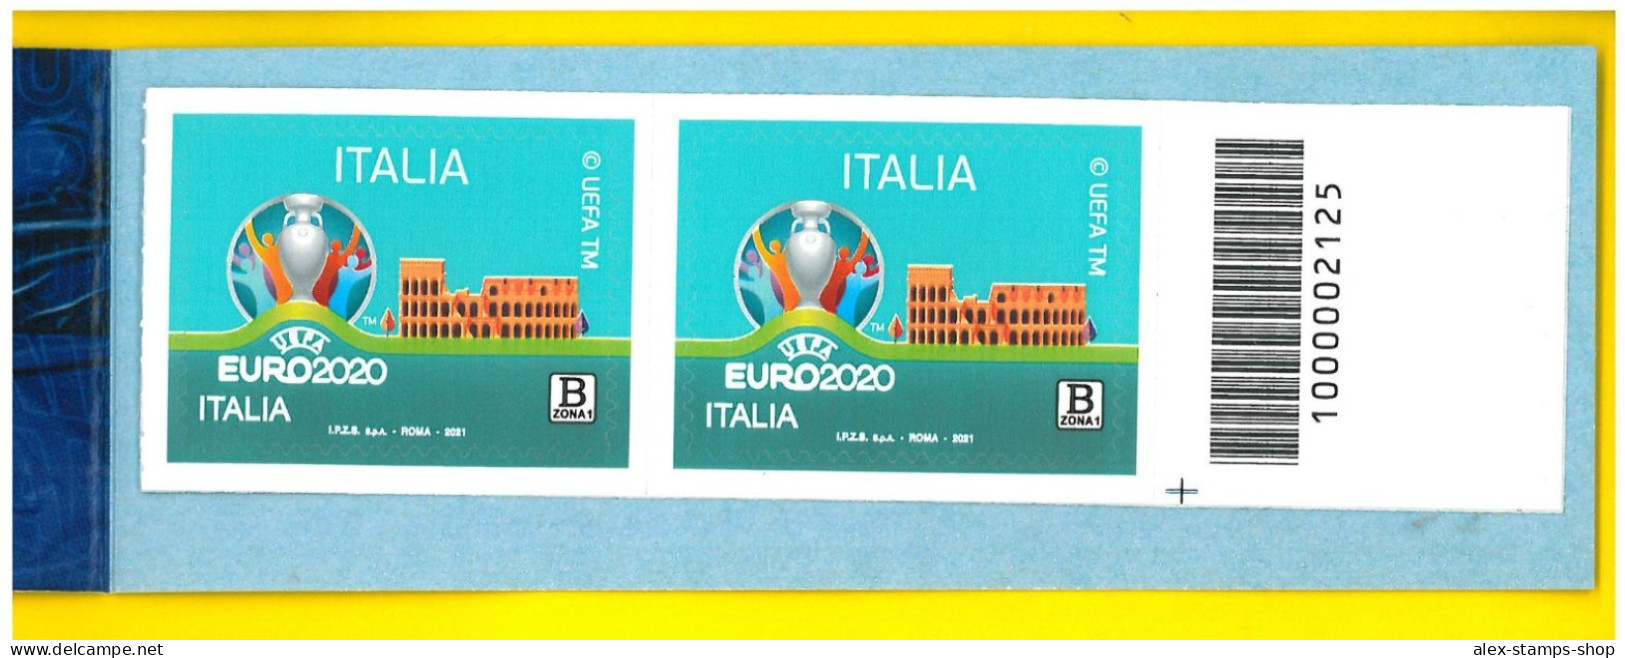 ITALIA 2021 NEW BOOKLET EUROPEAN 2020 - BARCODE NUMBER 020 - Carnets